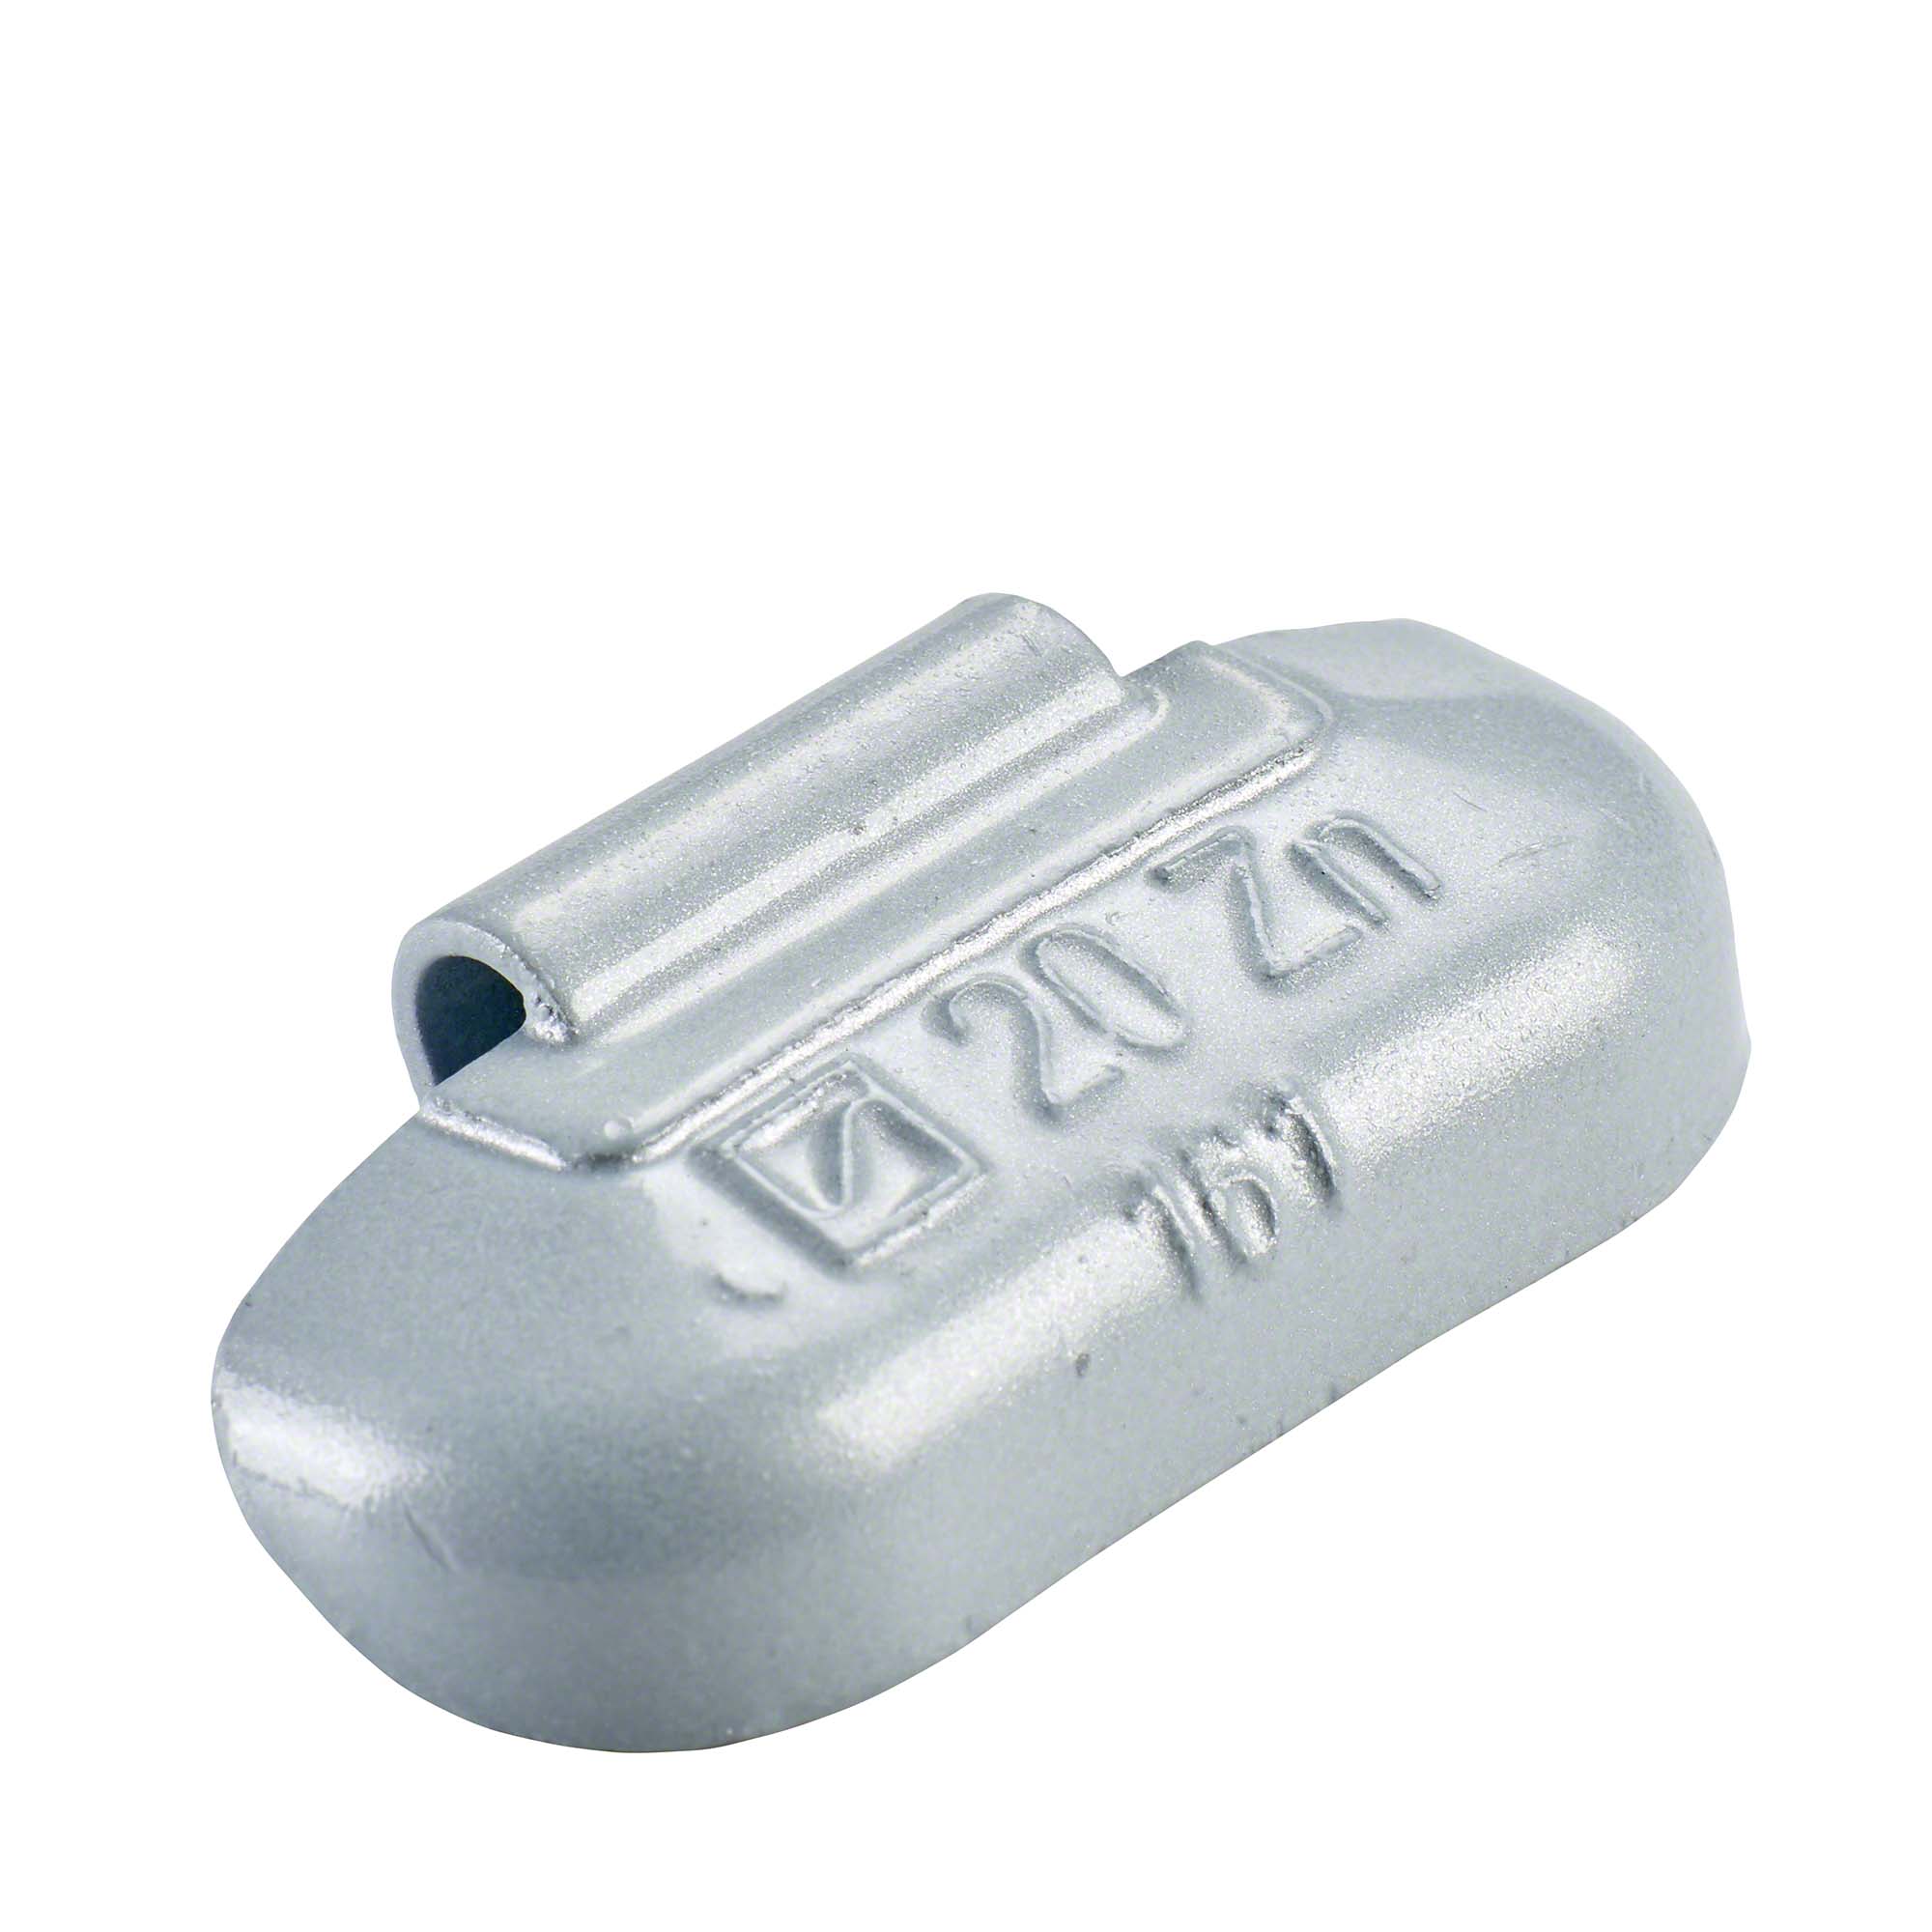 knock-on weight - Typ 161, 20 g, zinc, silver